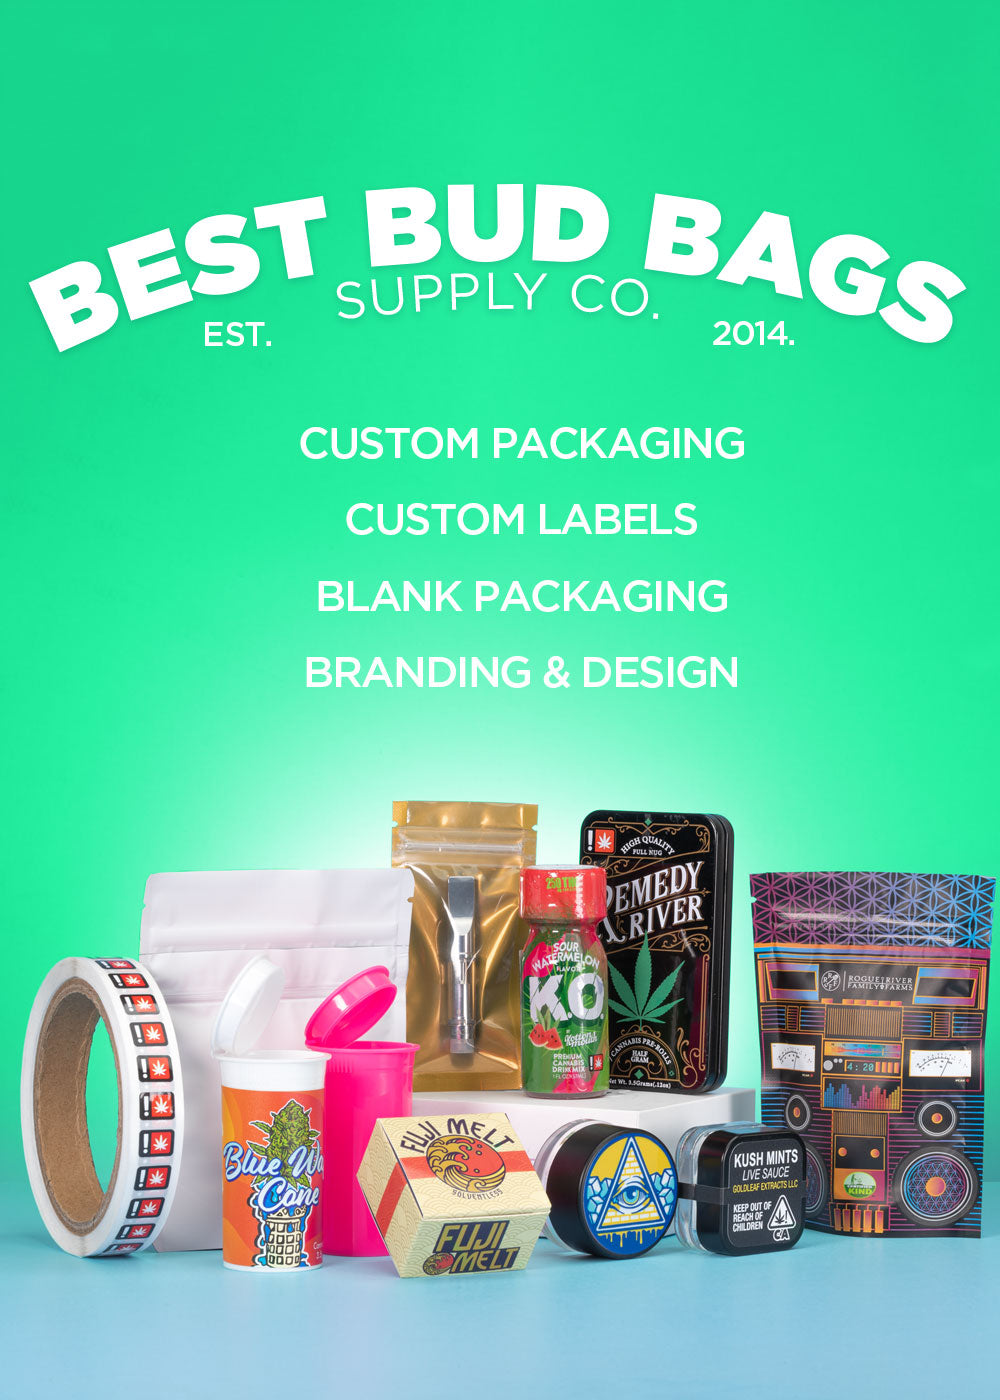 Wholesale Product Packaging Company - Specialty Bags & More!